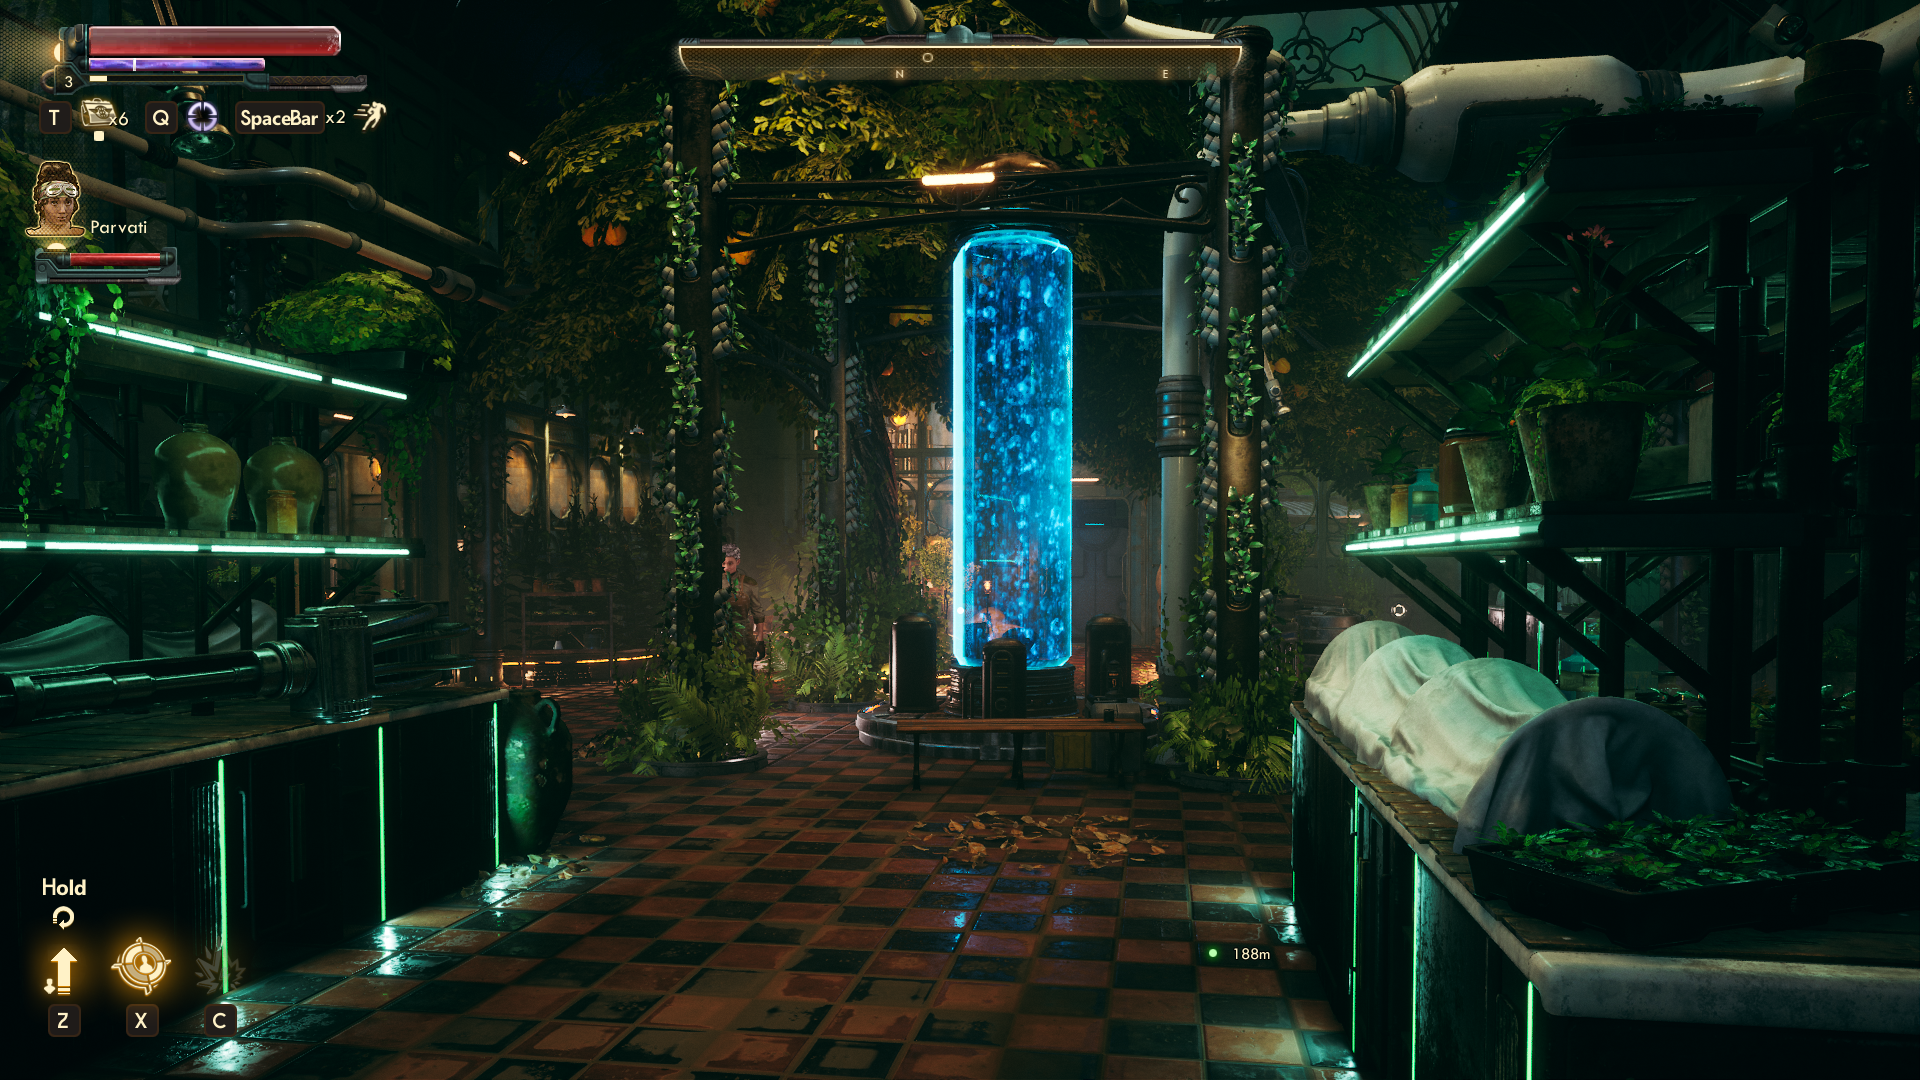 A science fiction-tinged hothouse in The Outer Worlds: Spacer's Choice Edition.